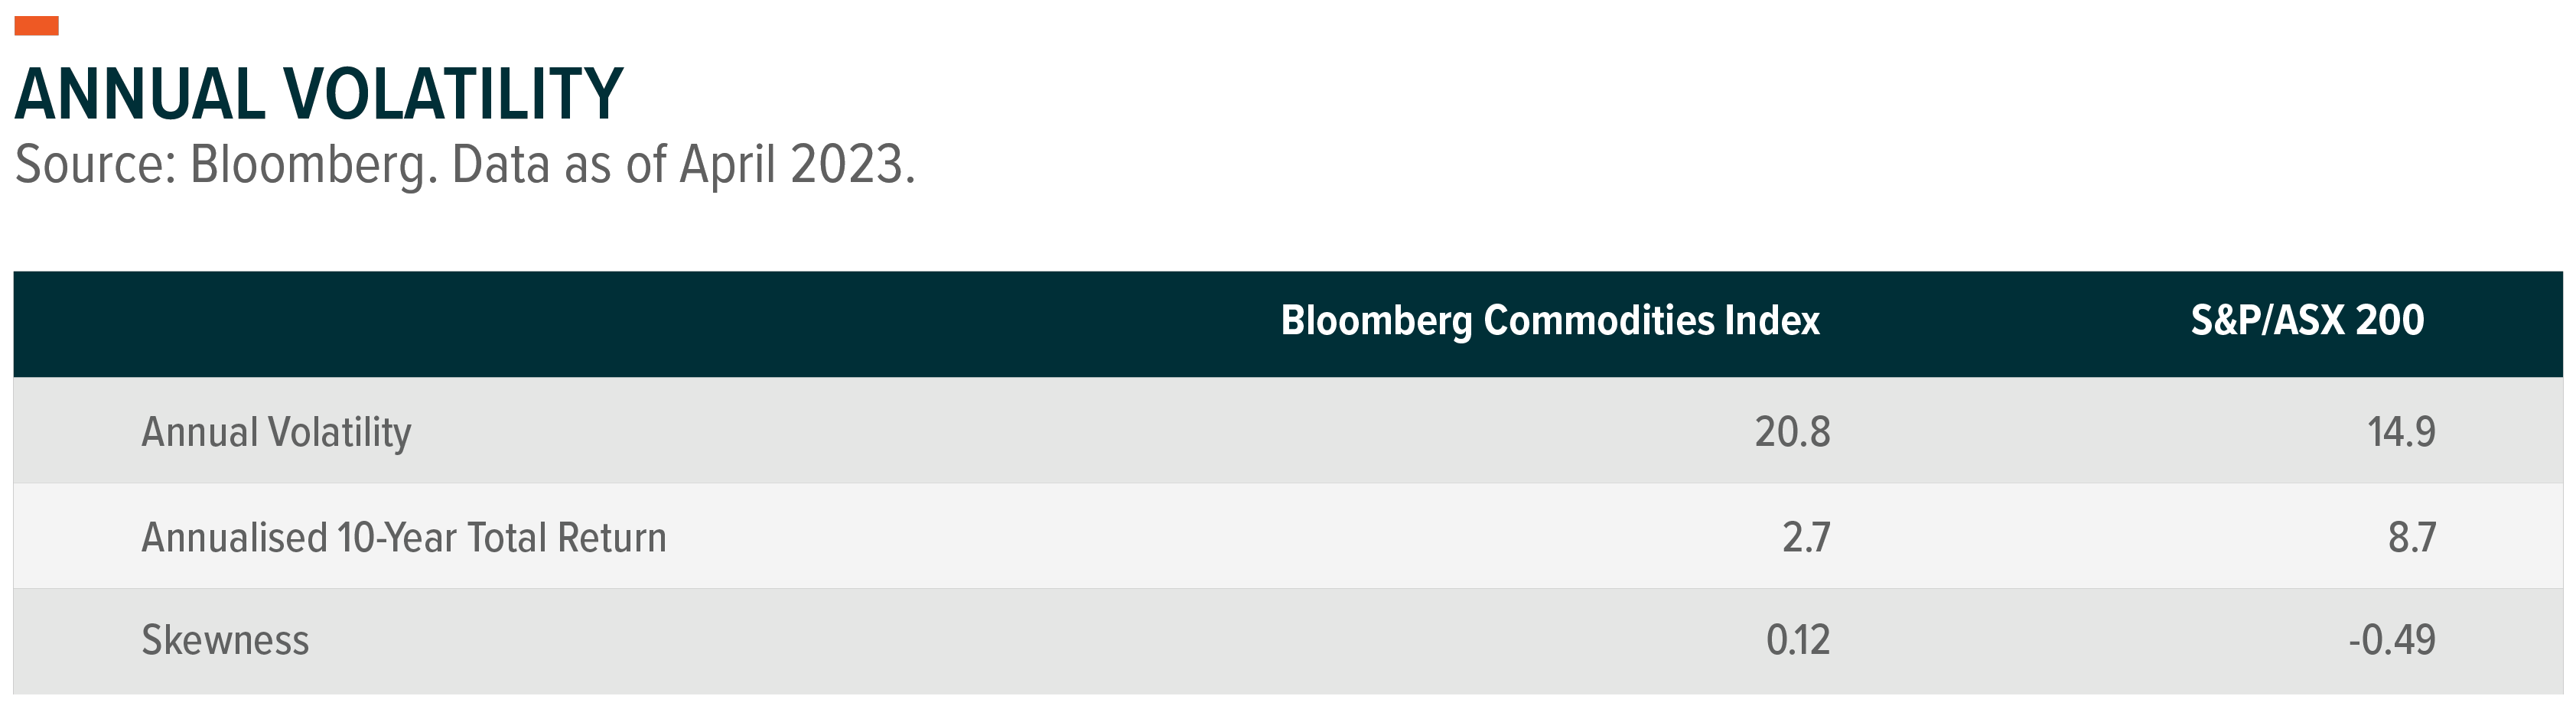 annual volatility of bloomberg commodities index- table